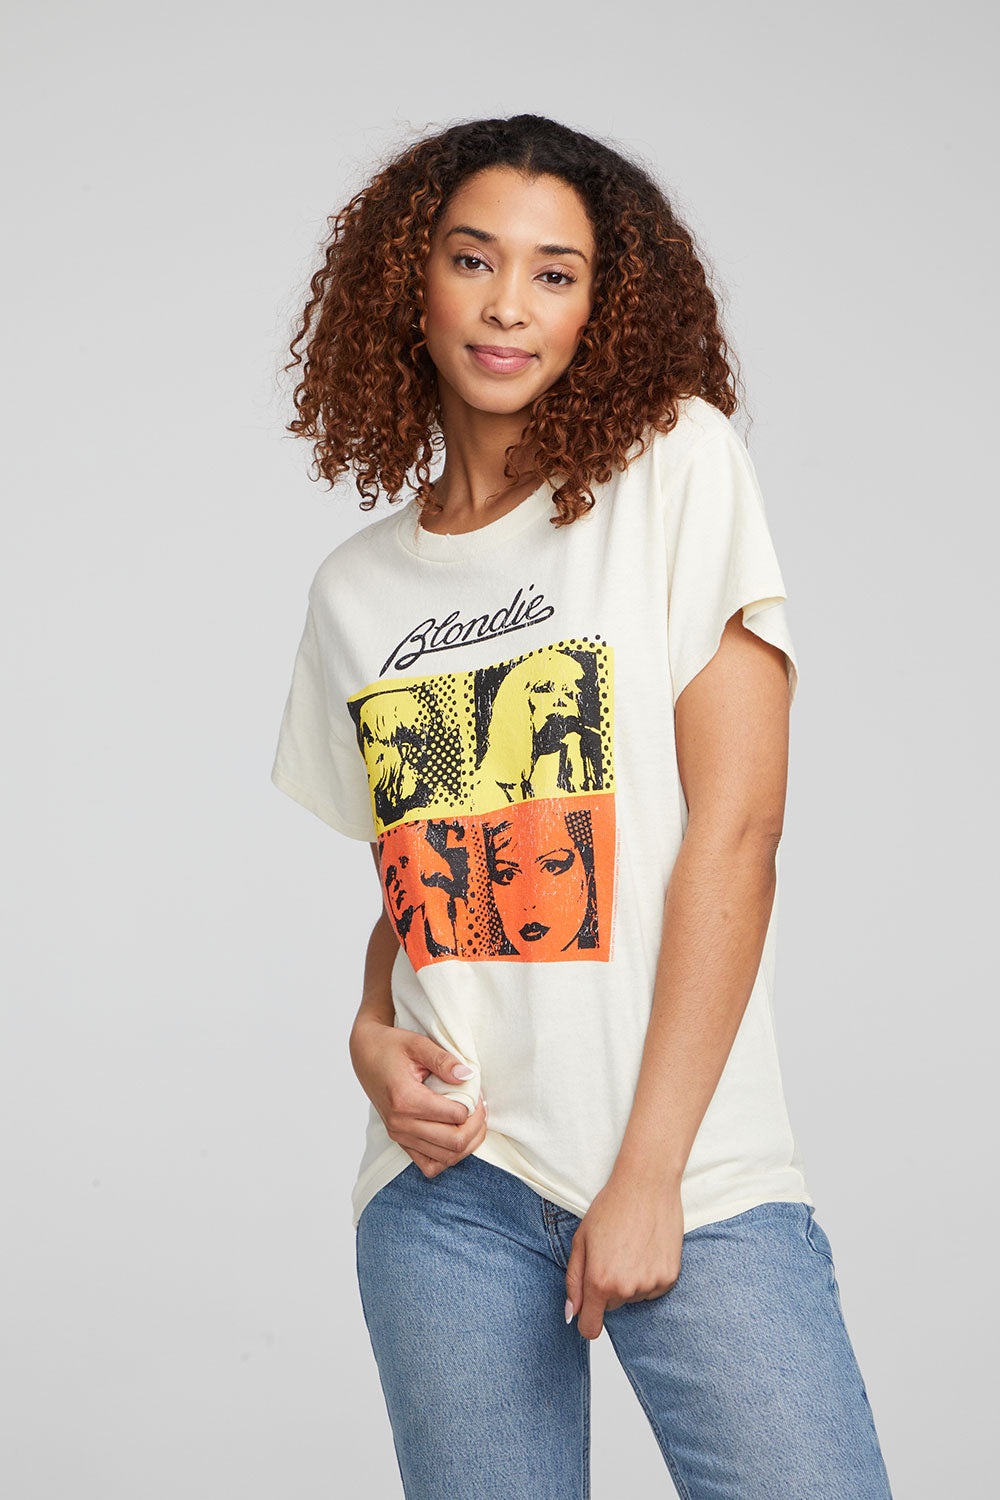 Blondie Retro Poster Tee WOMENS chaserbrand